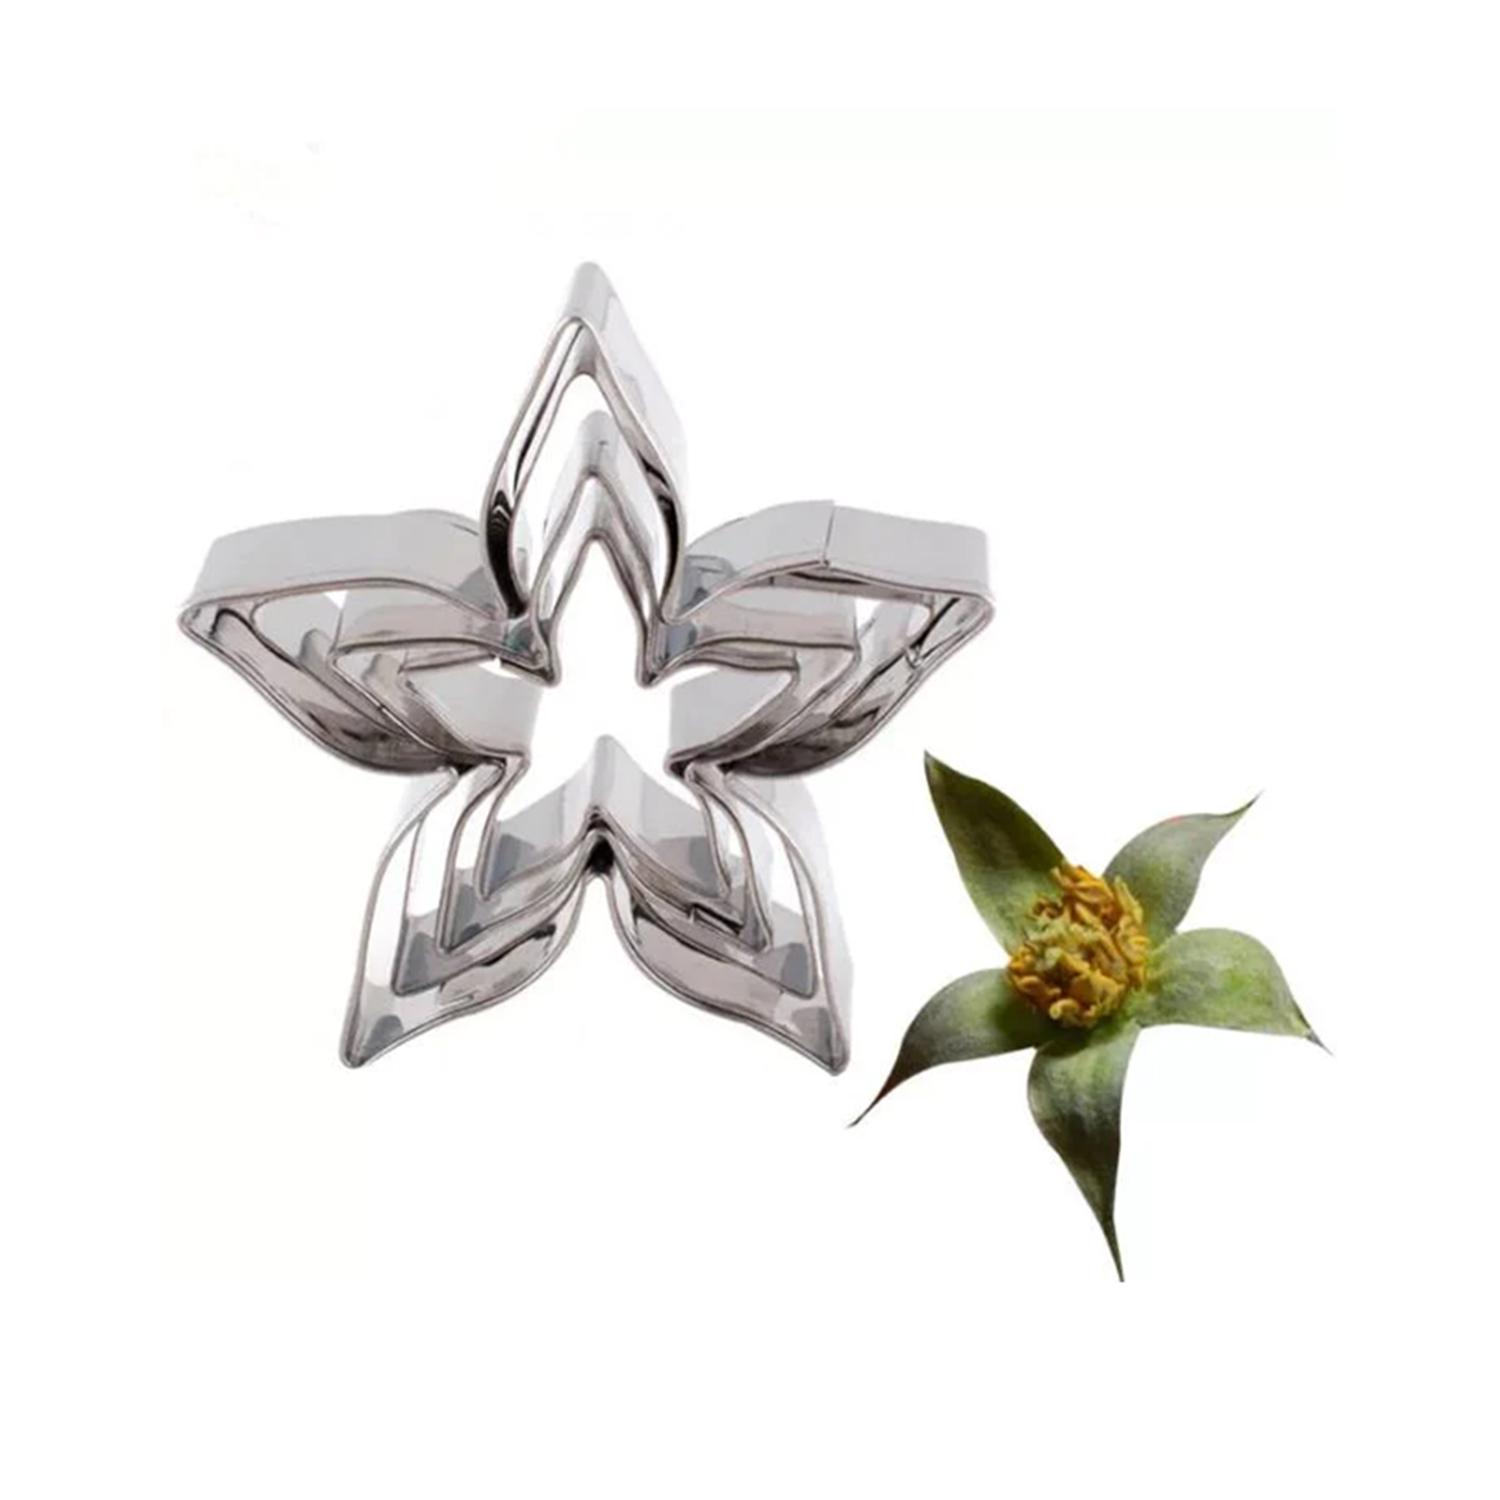 A340 4PCS STAINLESS STEEL ROSE CALYX CUTTER SET